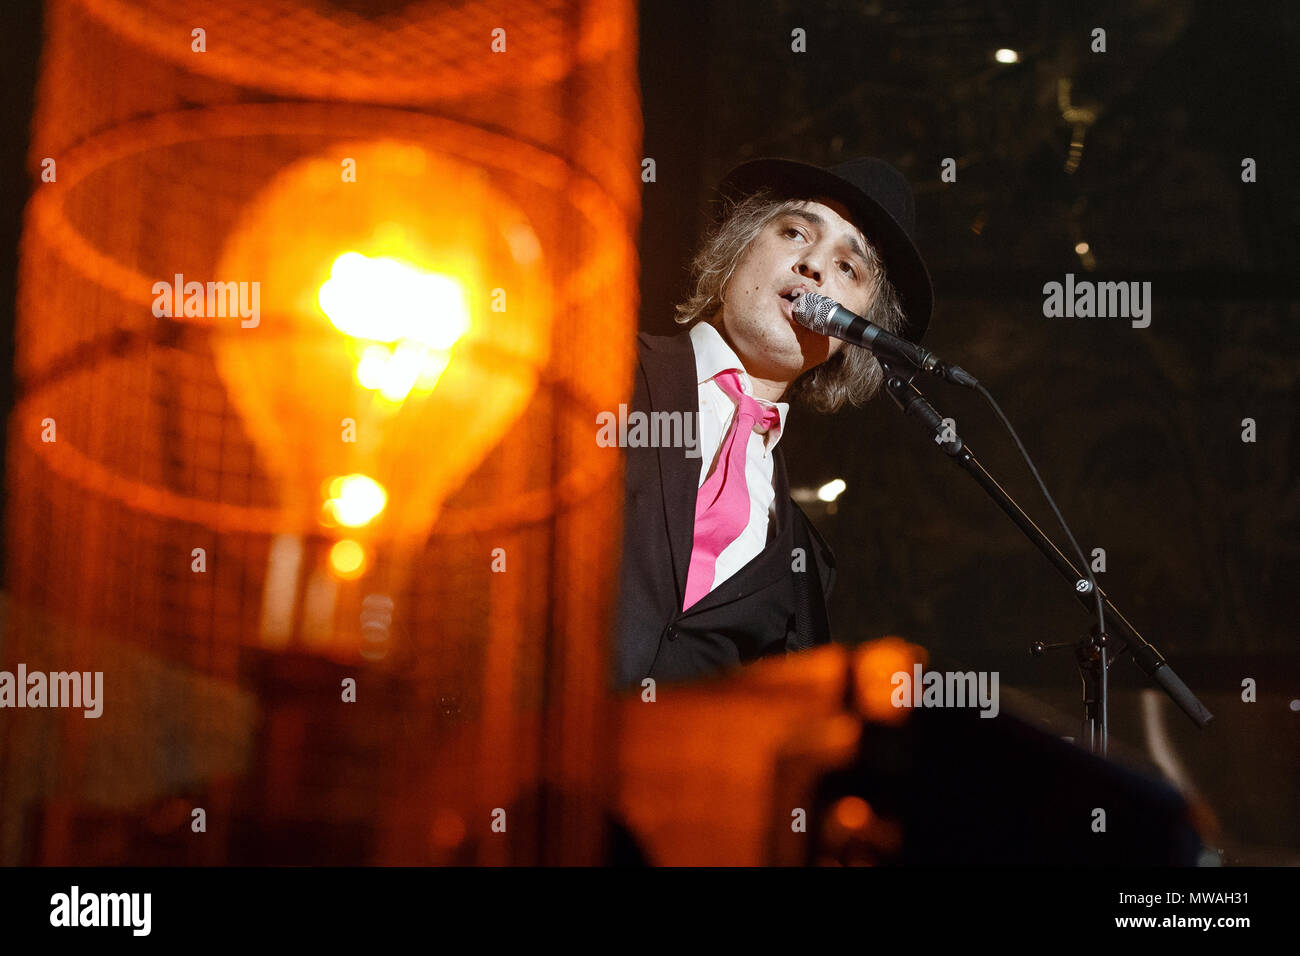 Pete Doherty performing live with The Libertines in Glasgow, Scotland. Peter Doherty, Pete Doherty onstage, Pete Doherty singer. Stock Photo